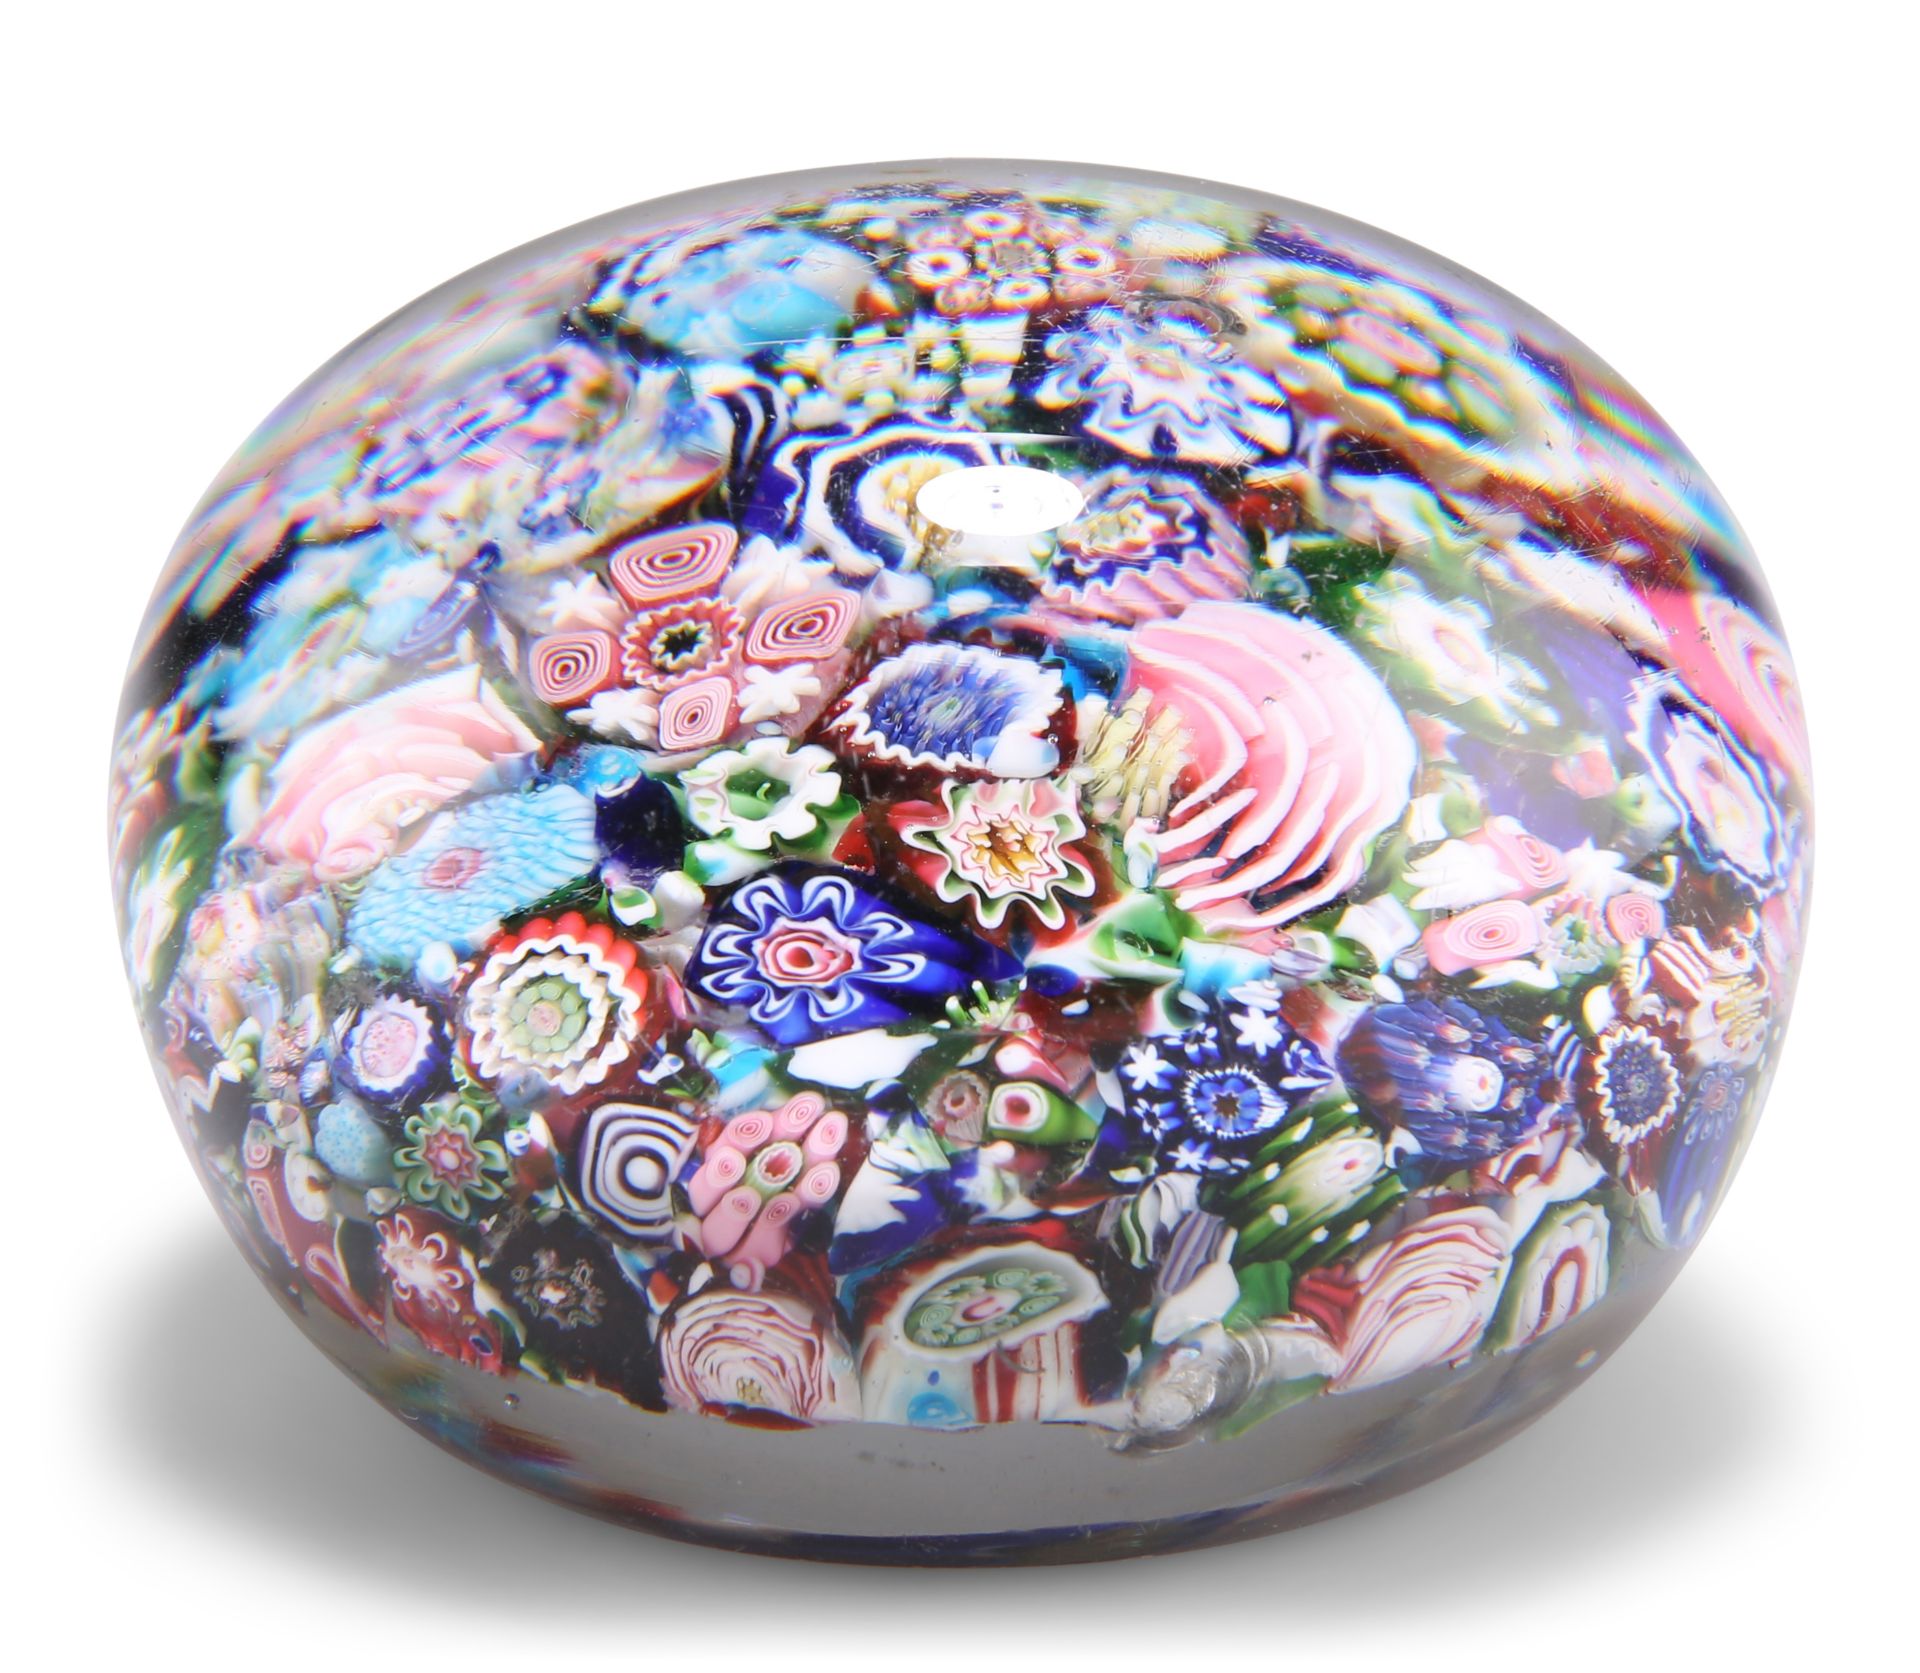 A SIGNED CLICHY CLOSE-PACKED MILLEFIORI PAPERWEIGHT, CIRCA 1850 - Image 2 of 3